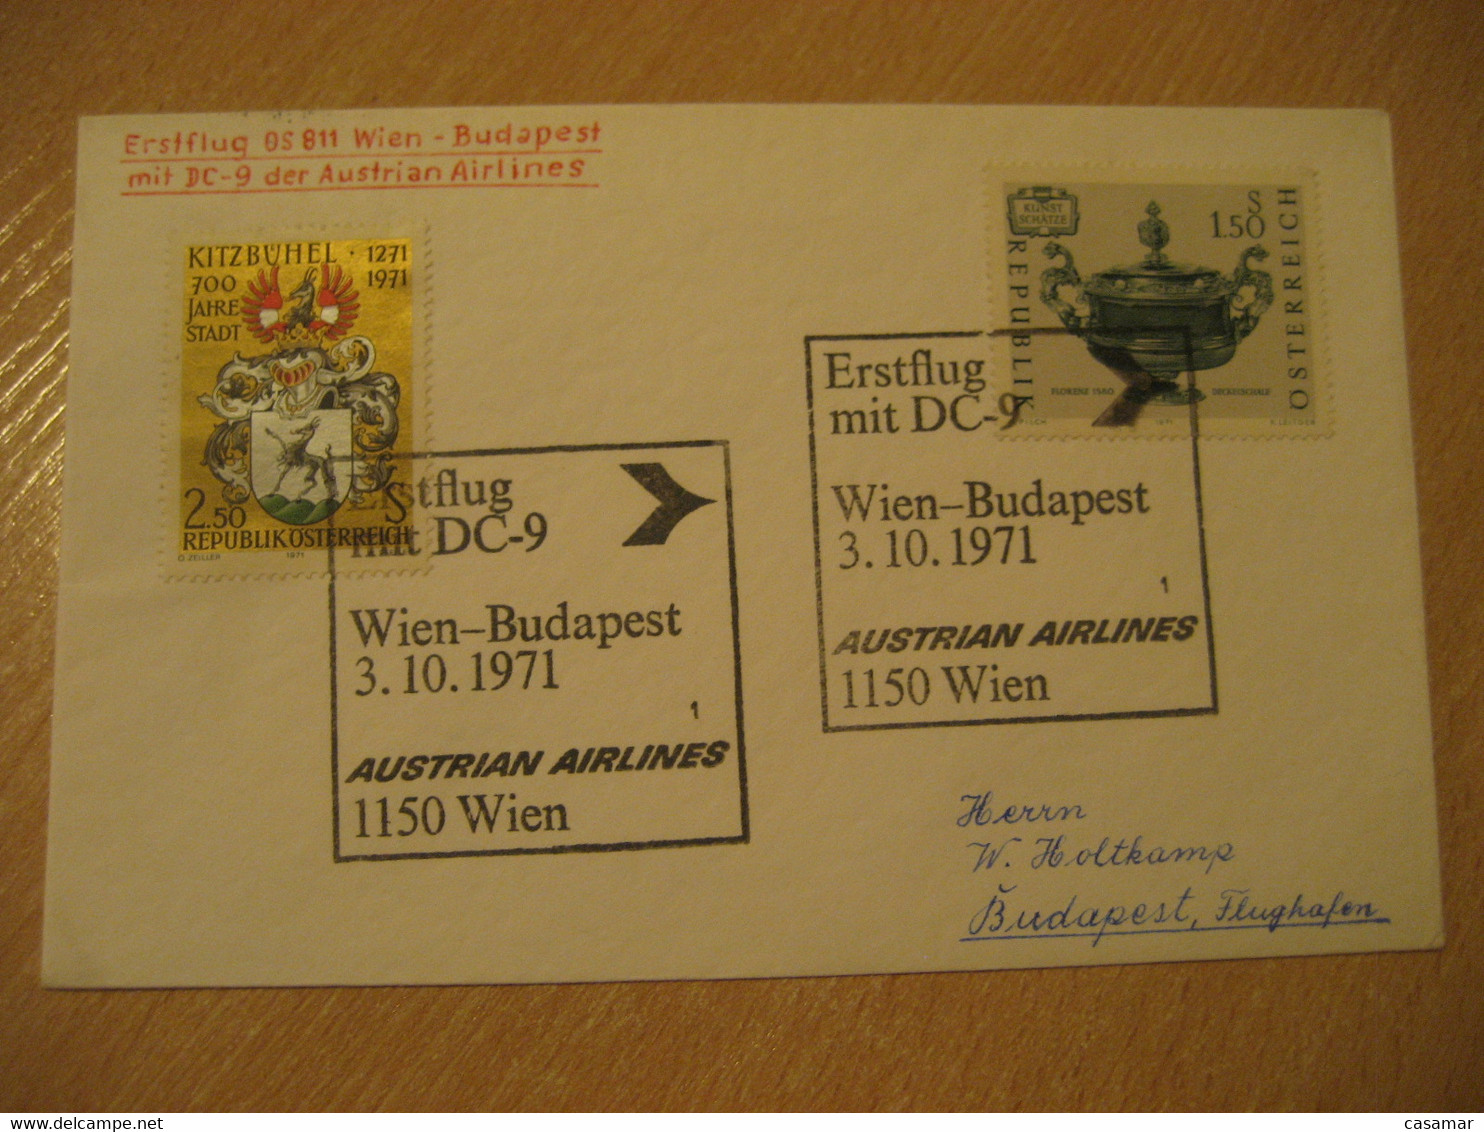 BUDAPEST Wien 1971 AUA Austrian Airlines Airline DC-9 First Flight Cancel Cover HUNGARY AUSTRIA - Lettres & Documents